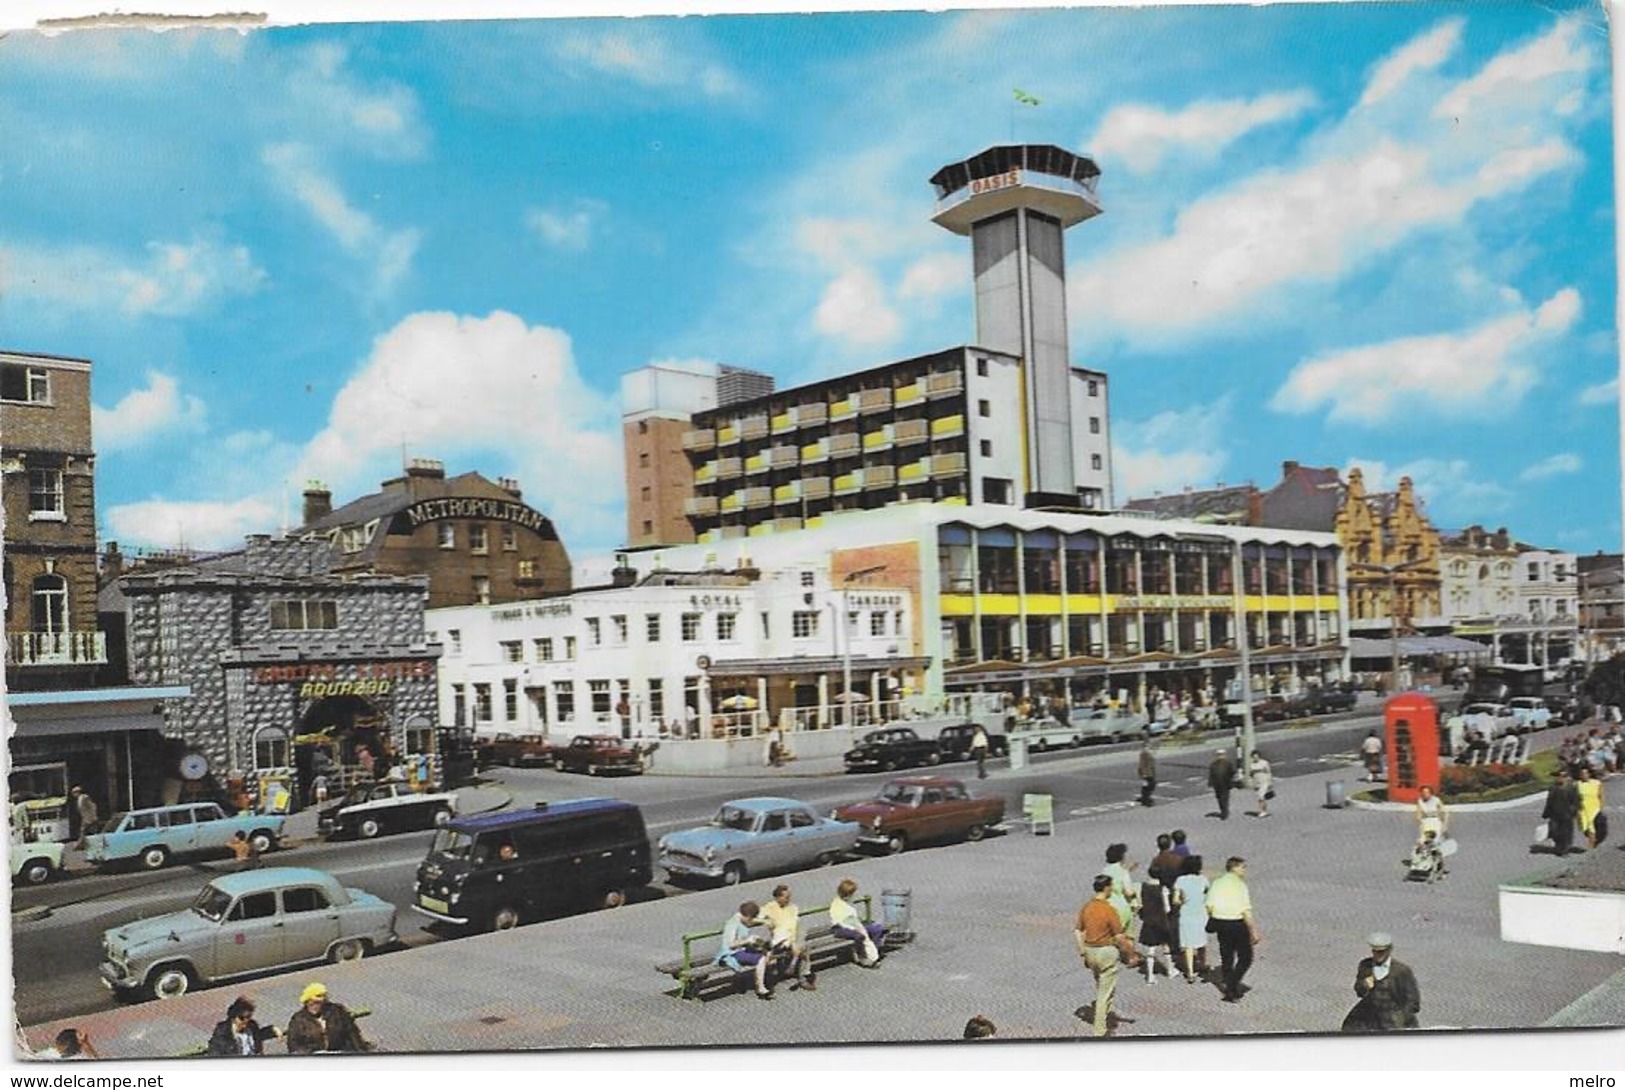 England - Postcard, The Tower And Ballroom. Great Yarmouth - Great Yarmouth